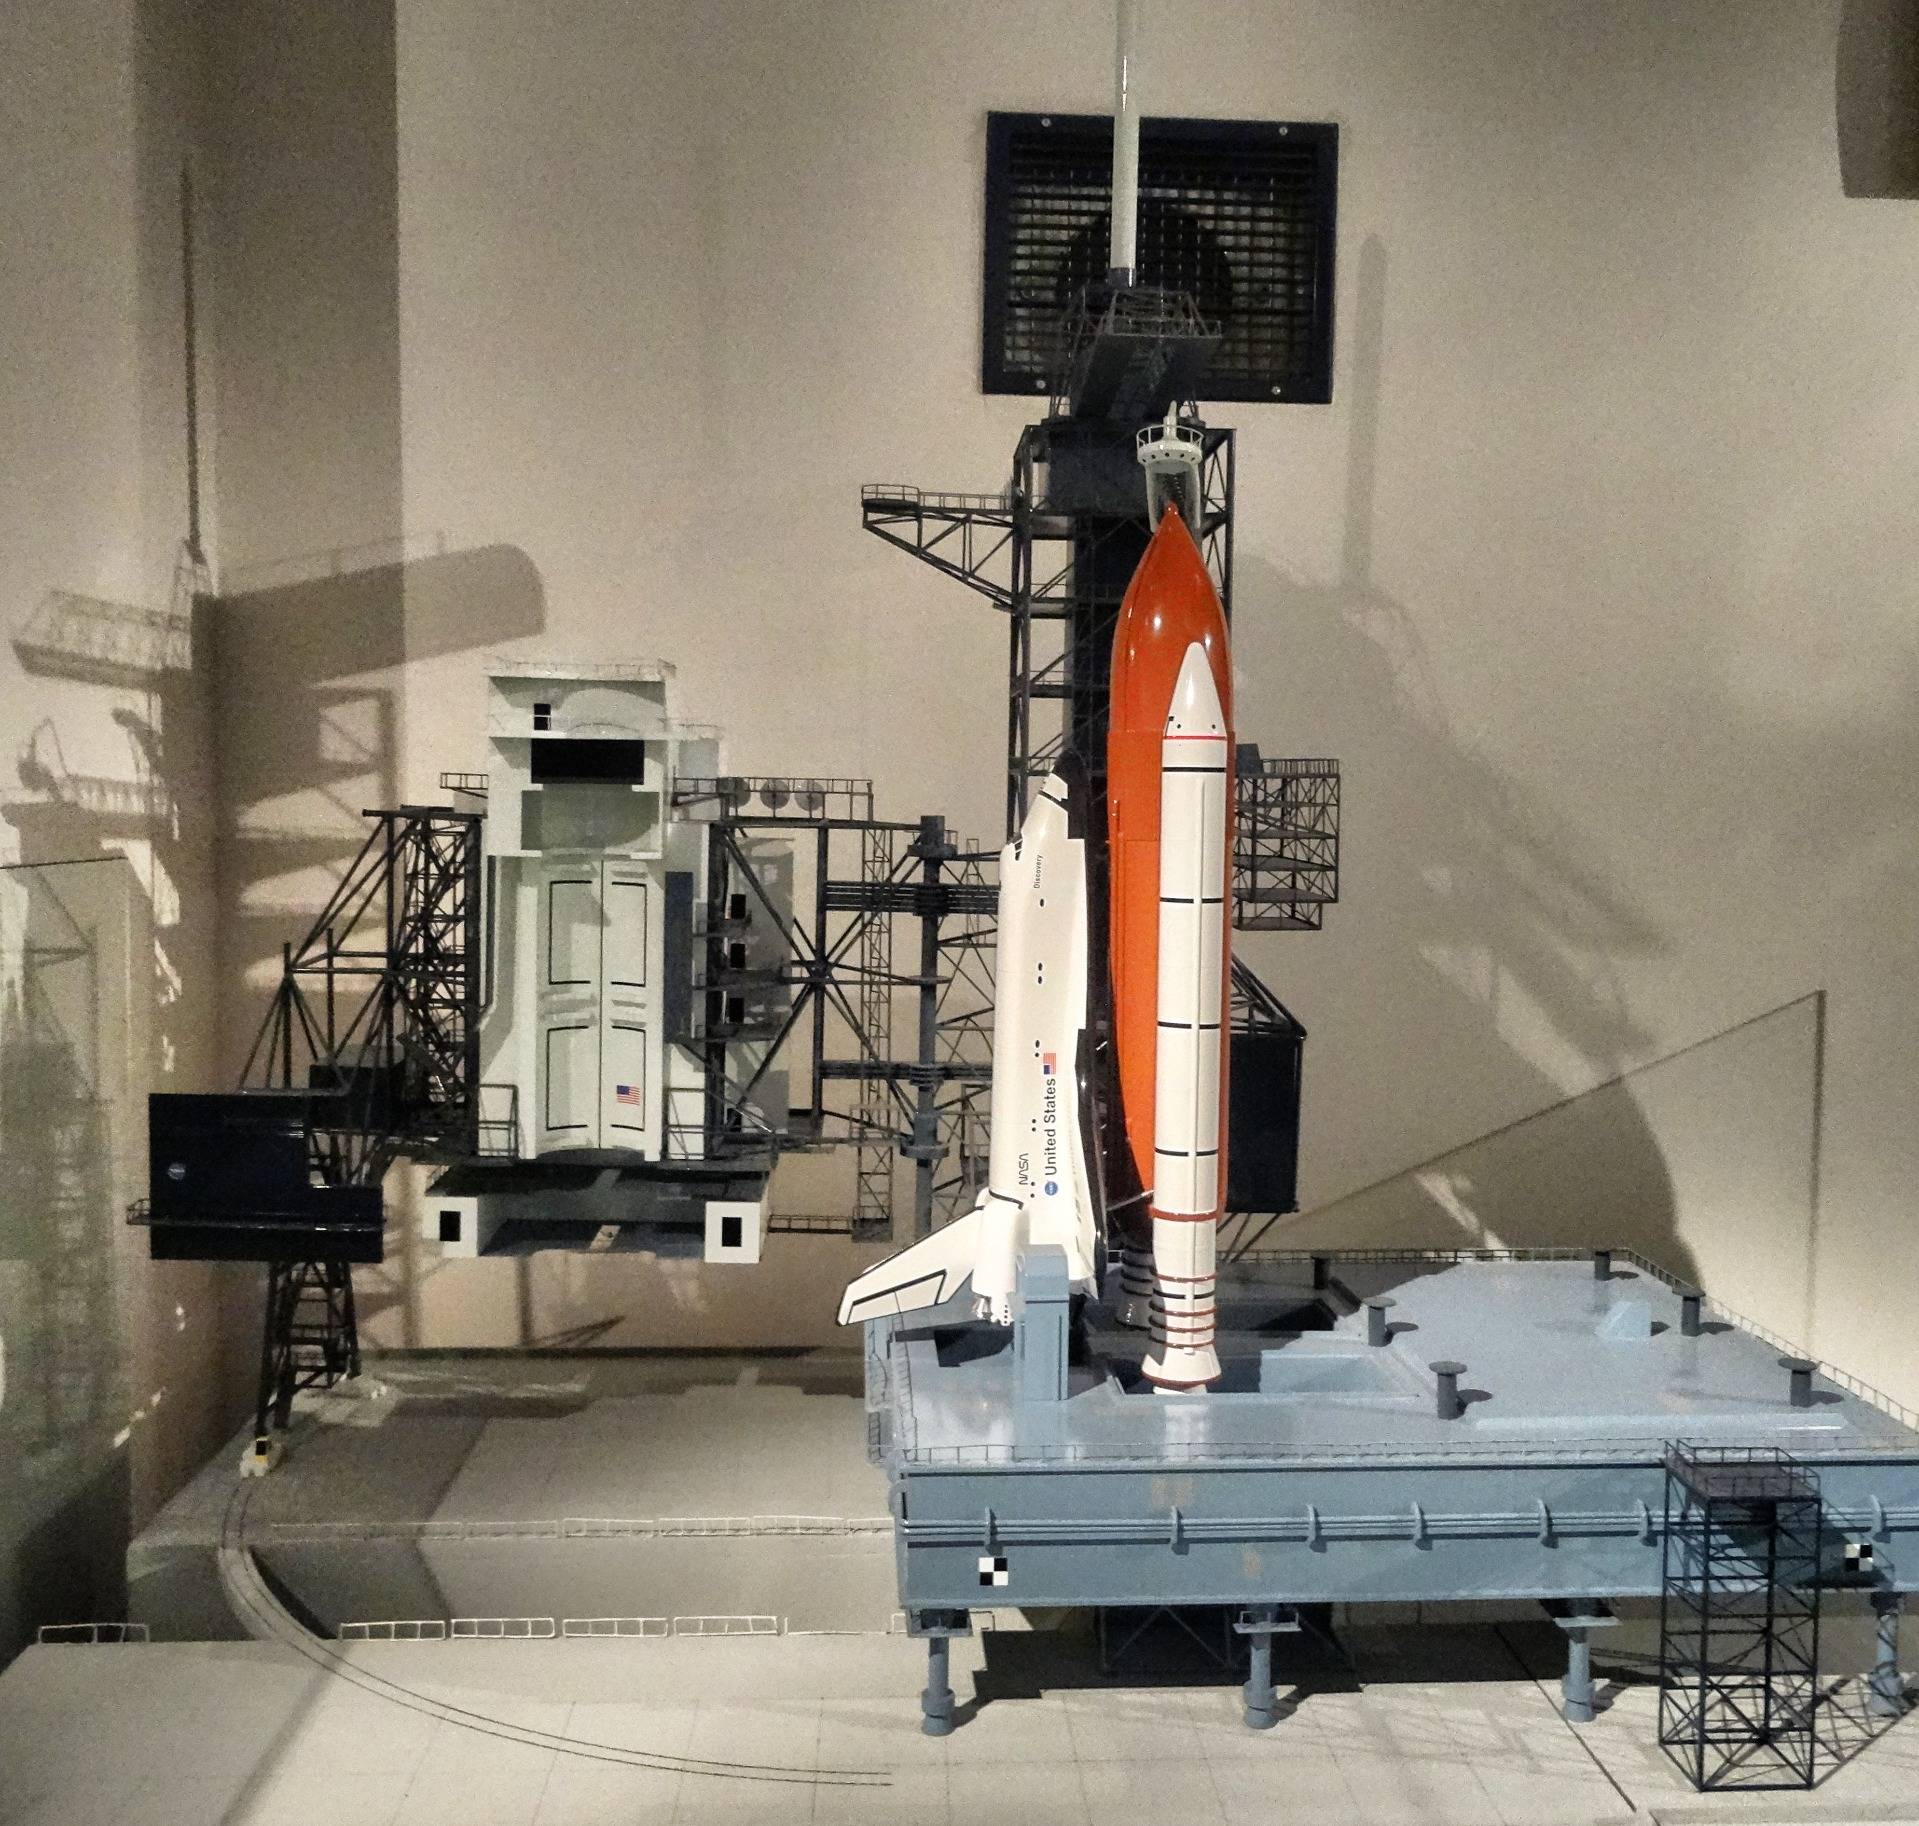 A model of the Buran shuttle